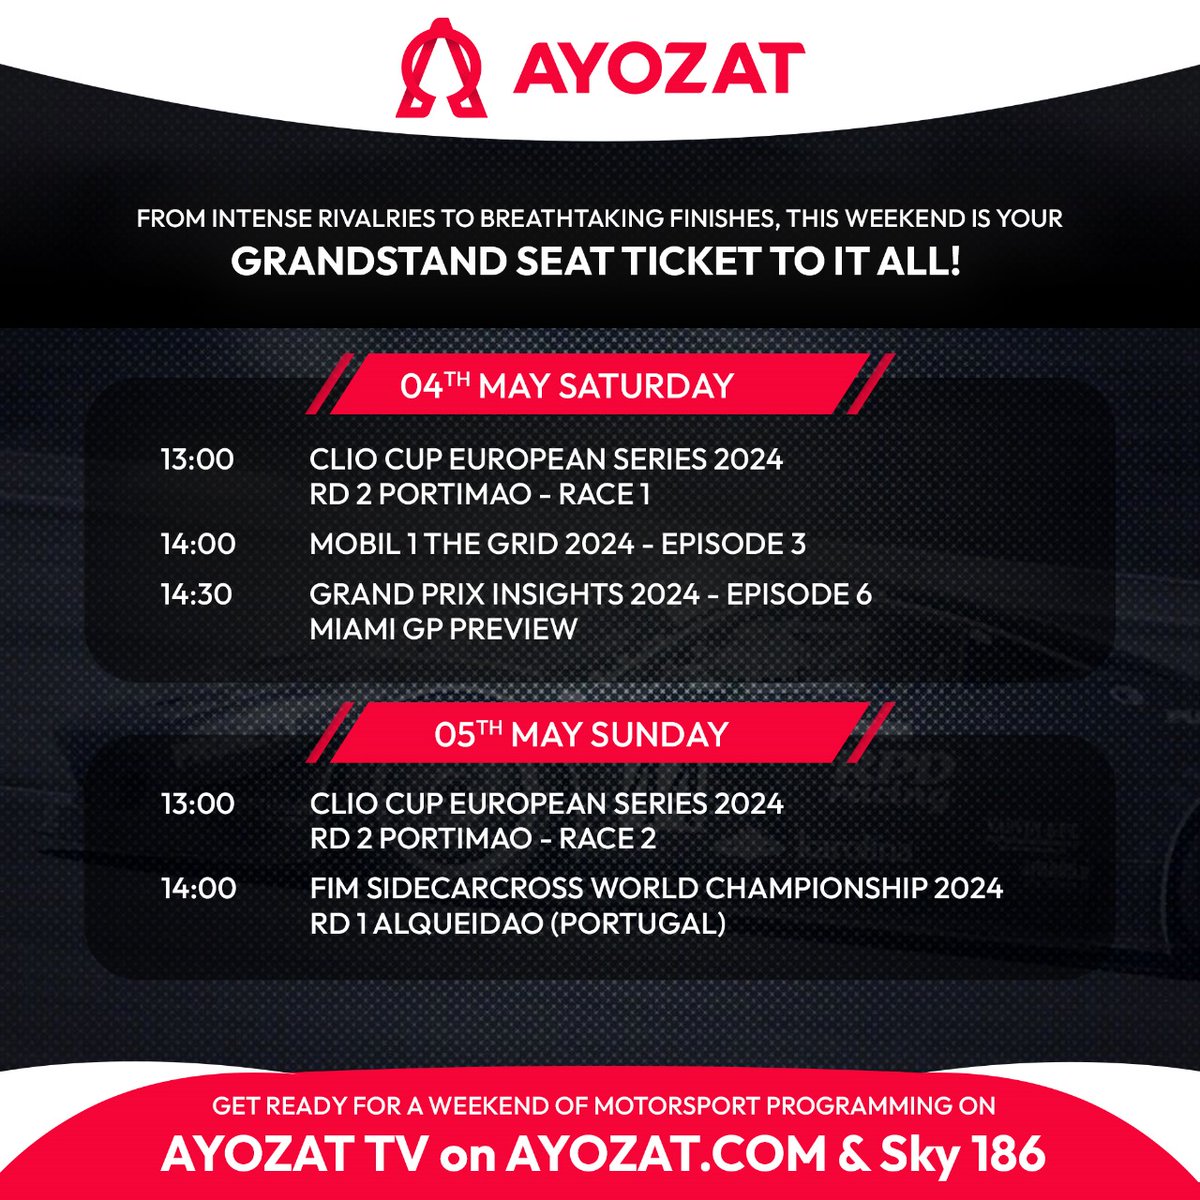 Buckle up for an action packed weekend! Don't miss the motorsport action starting from Saturday 1pm on AYOZAT TV on Sky 186 and ayozat.com. From high-speed races to thrilling showdowns, we've got your weekend covered! #motorsport #cars #racing #action #weekendracing